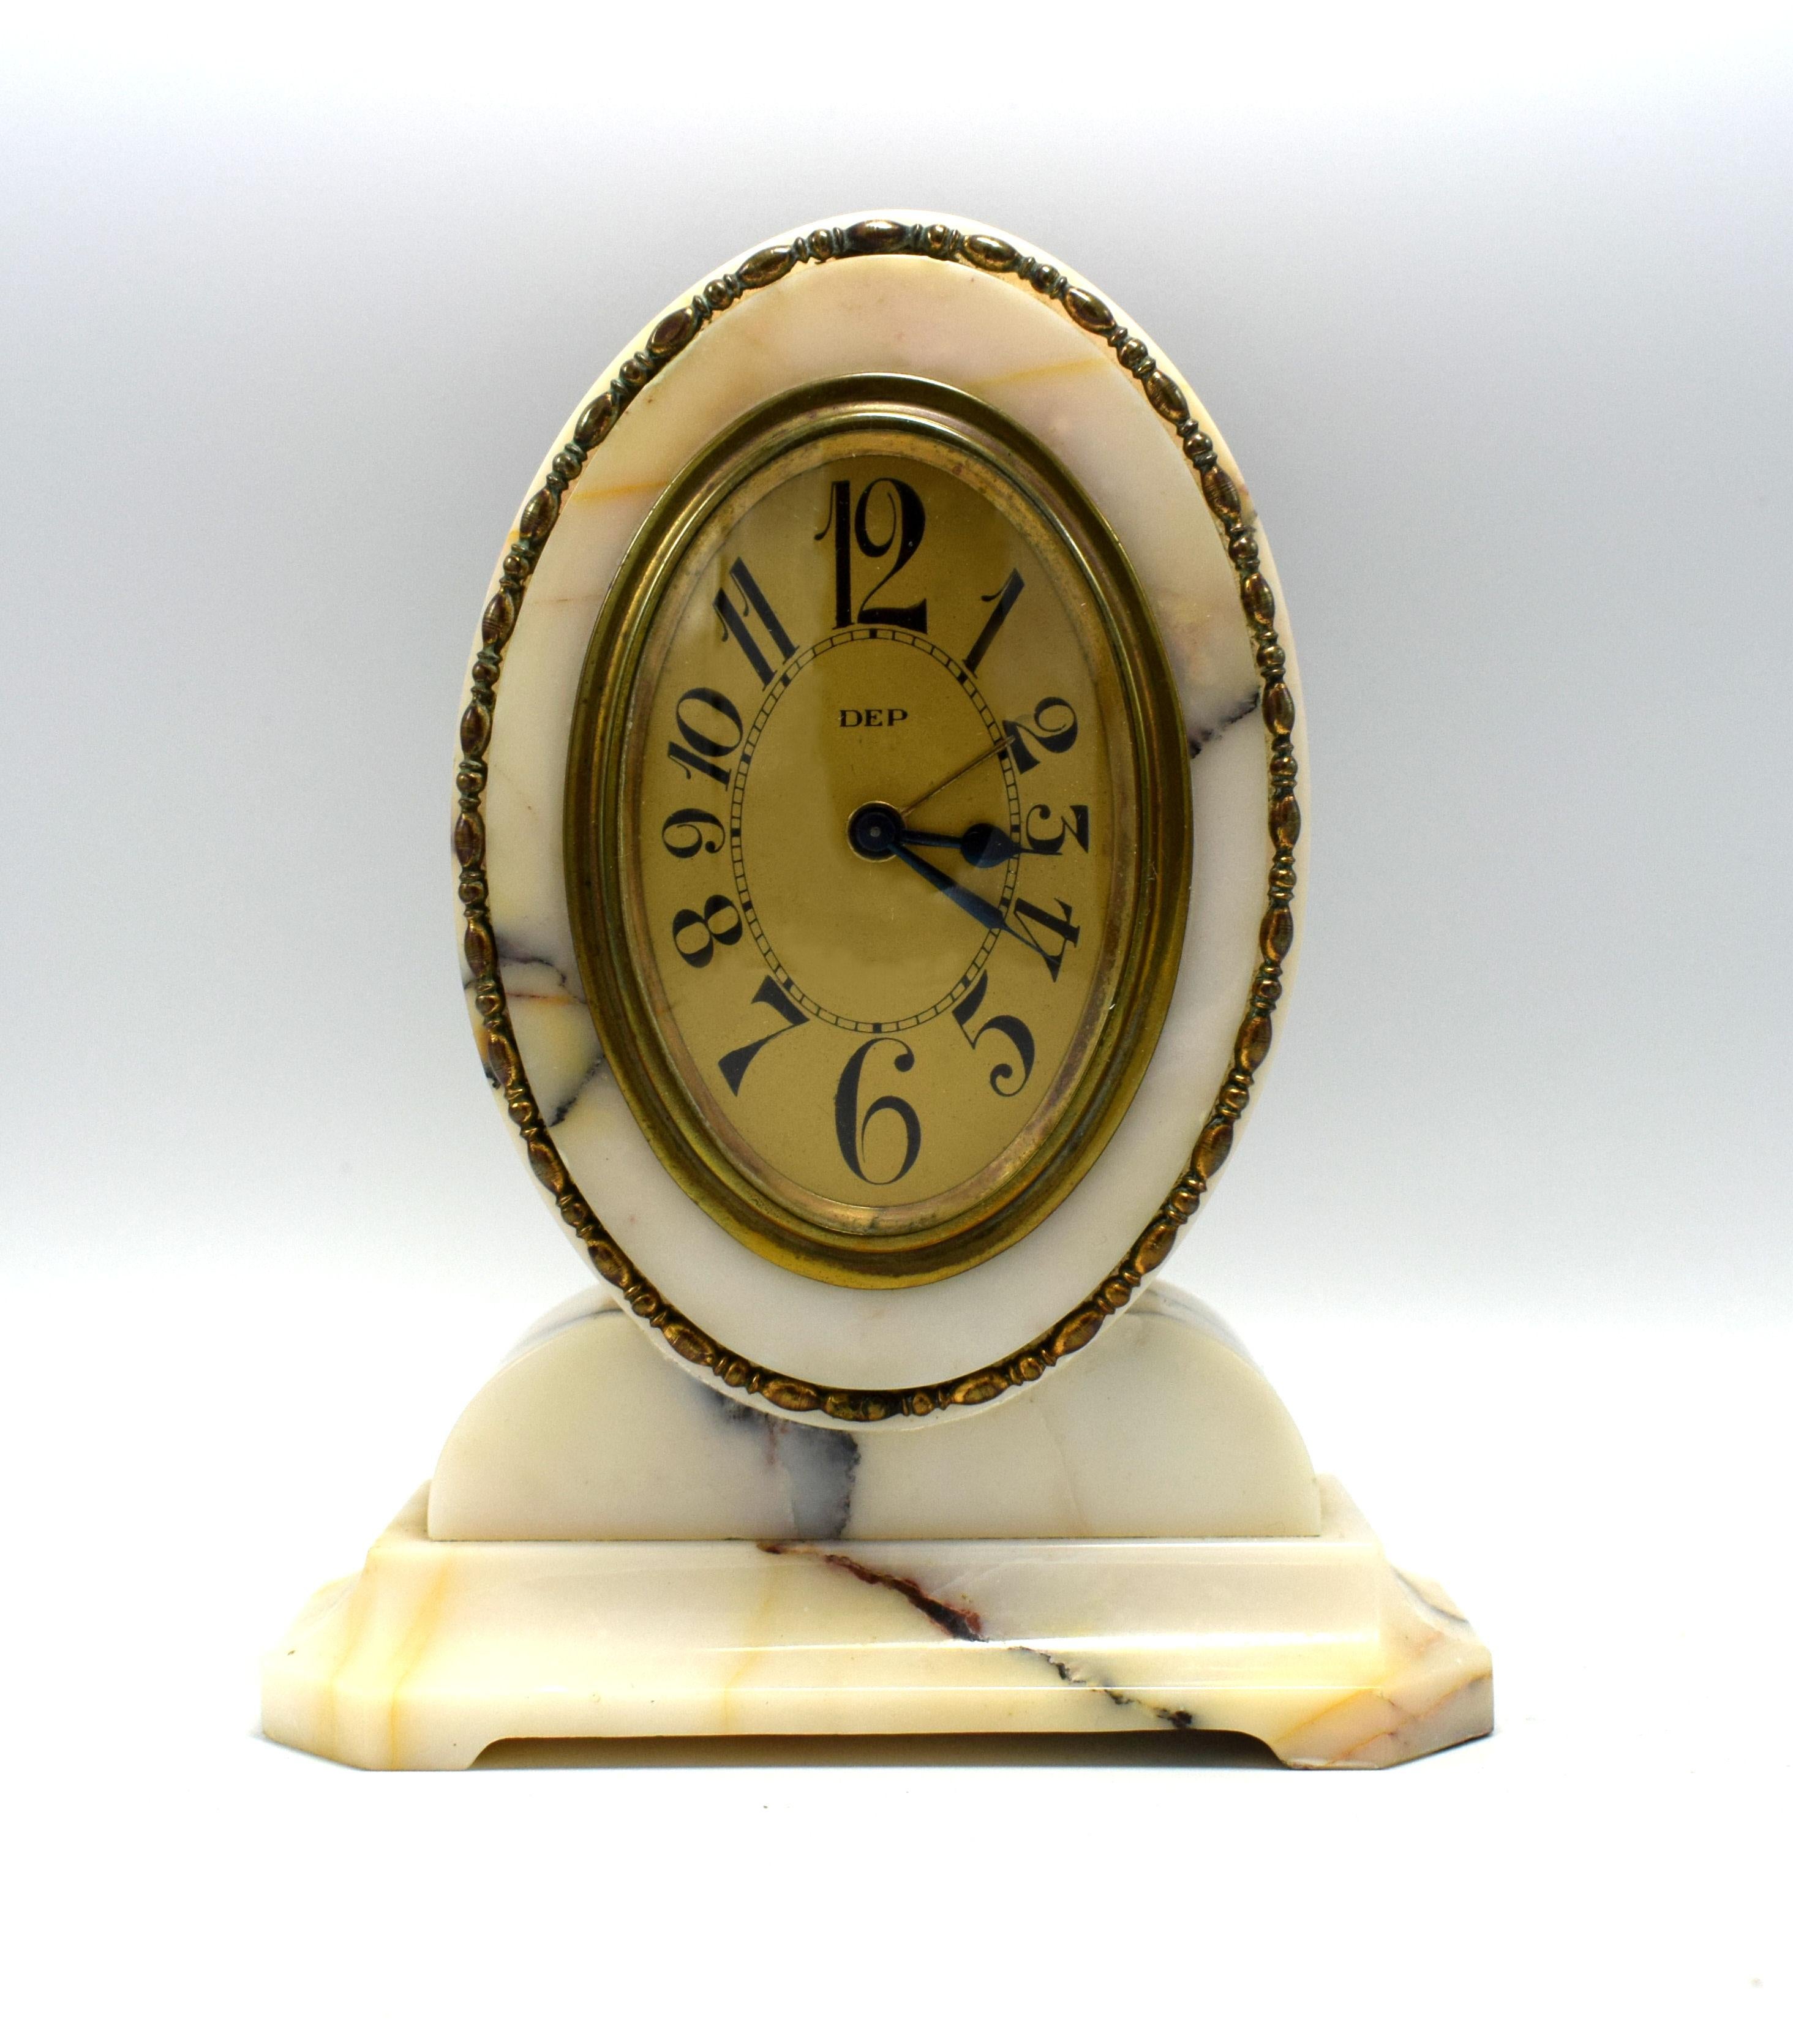 1930s Art Deco French Alarm Bedside Clock by Dep 1